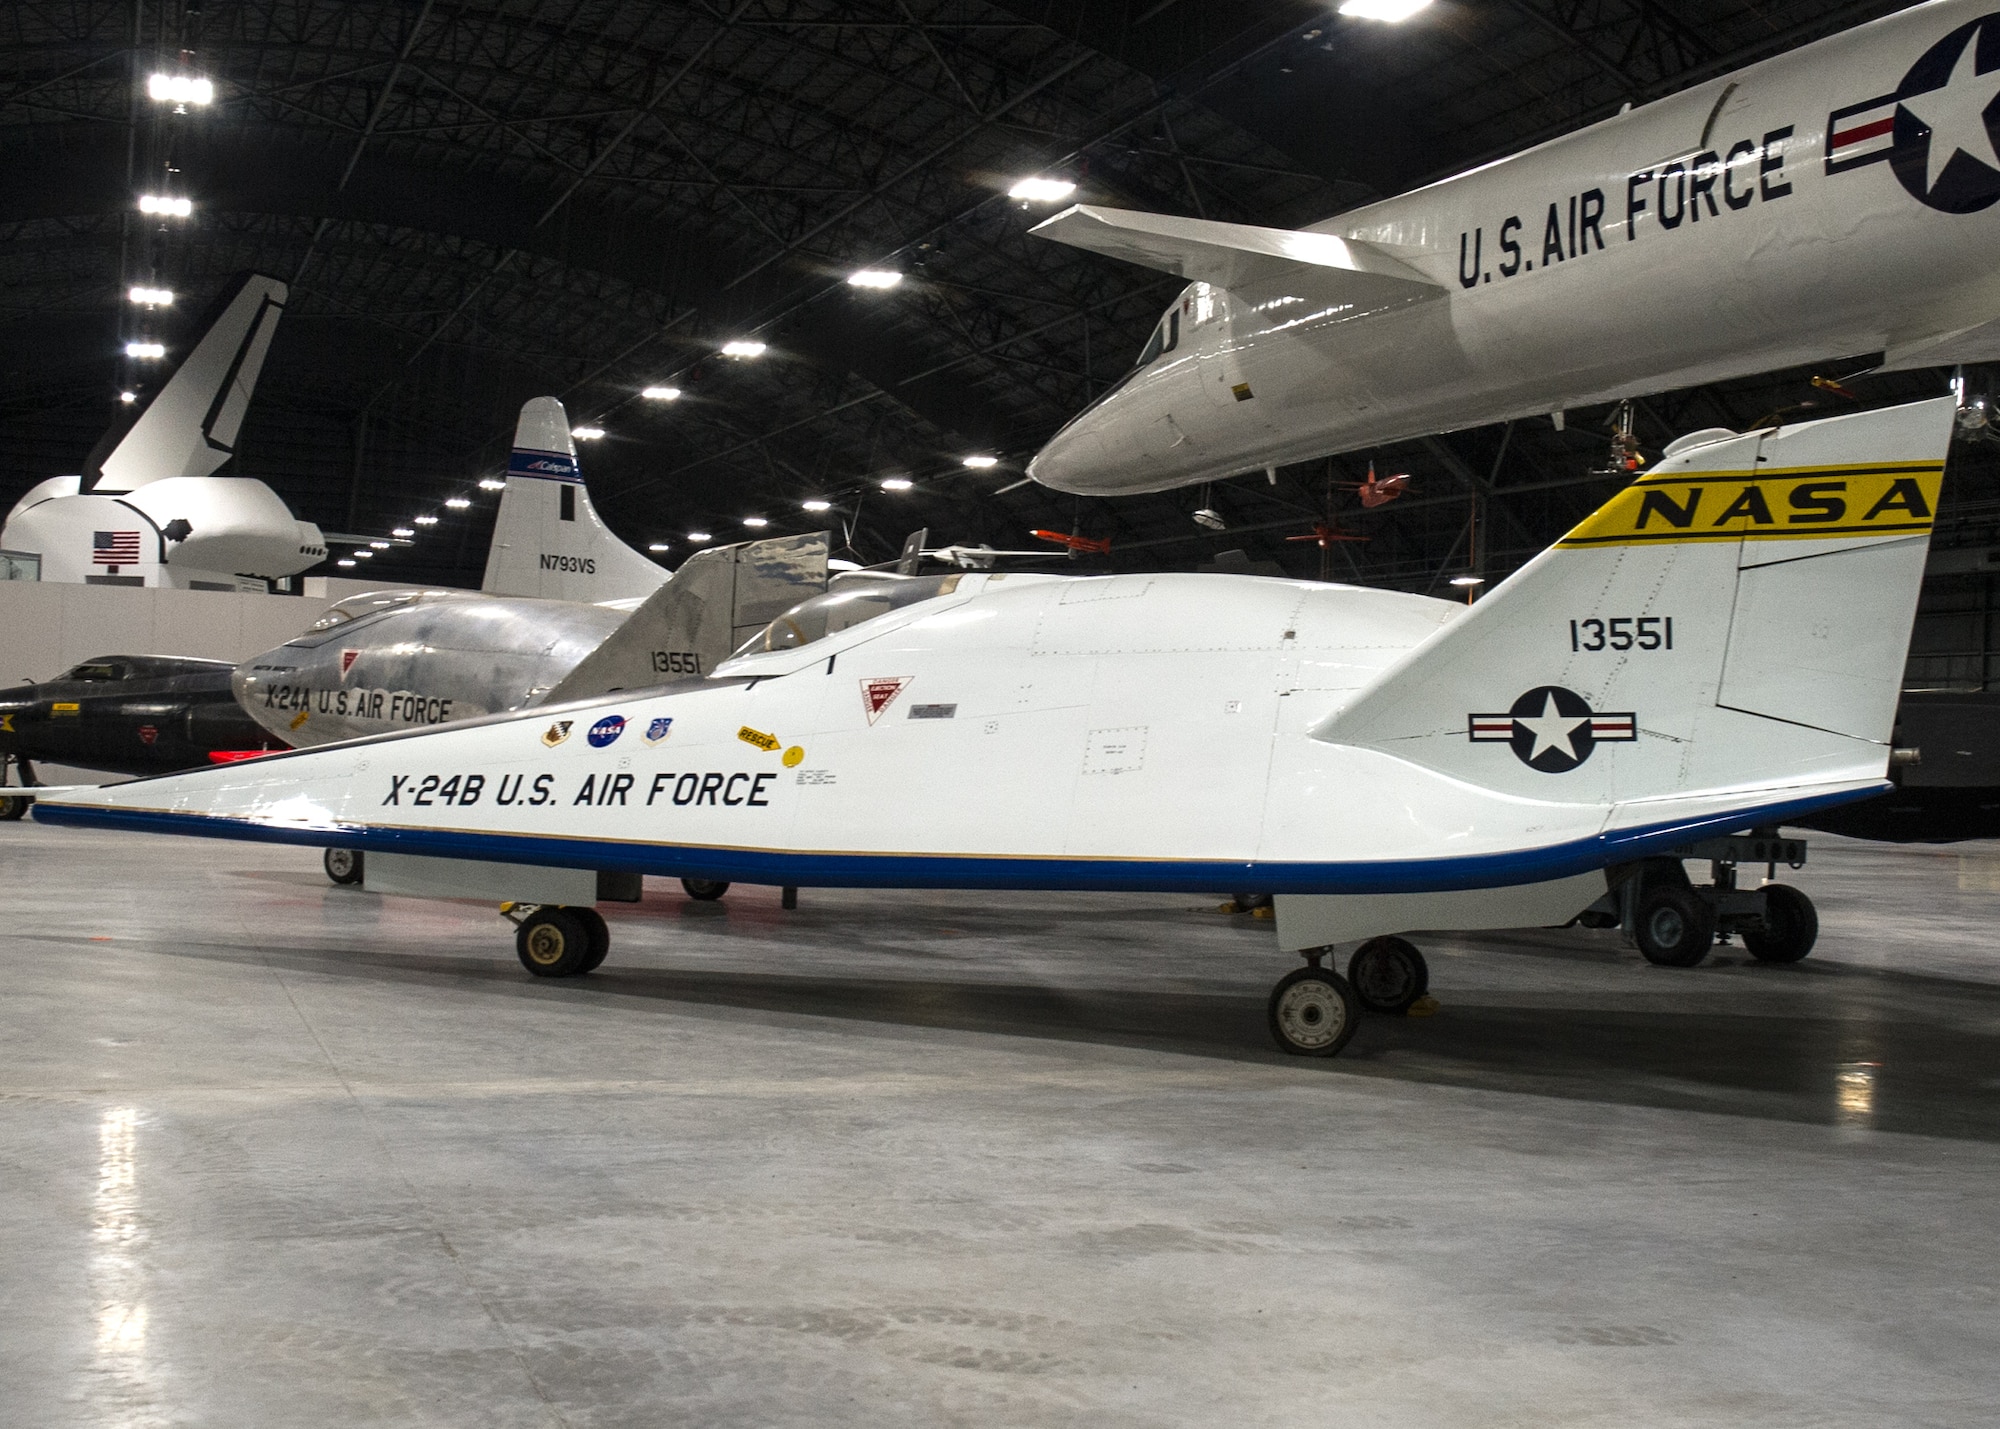 Martin X-24B in the Space Gallery at the National Museum of the U.S. Air Force on December 28, 2015. (U.S. Air Force photo)